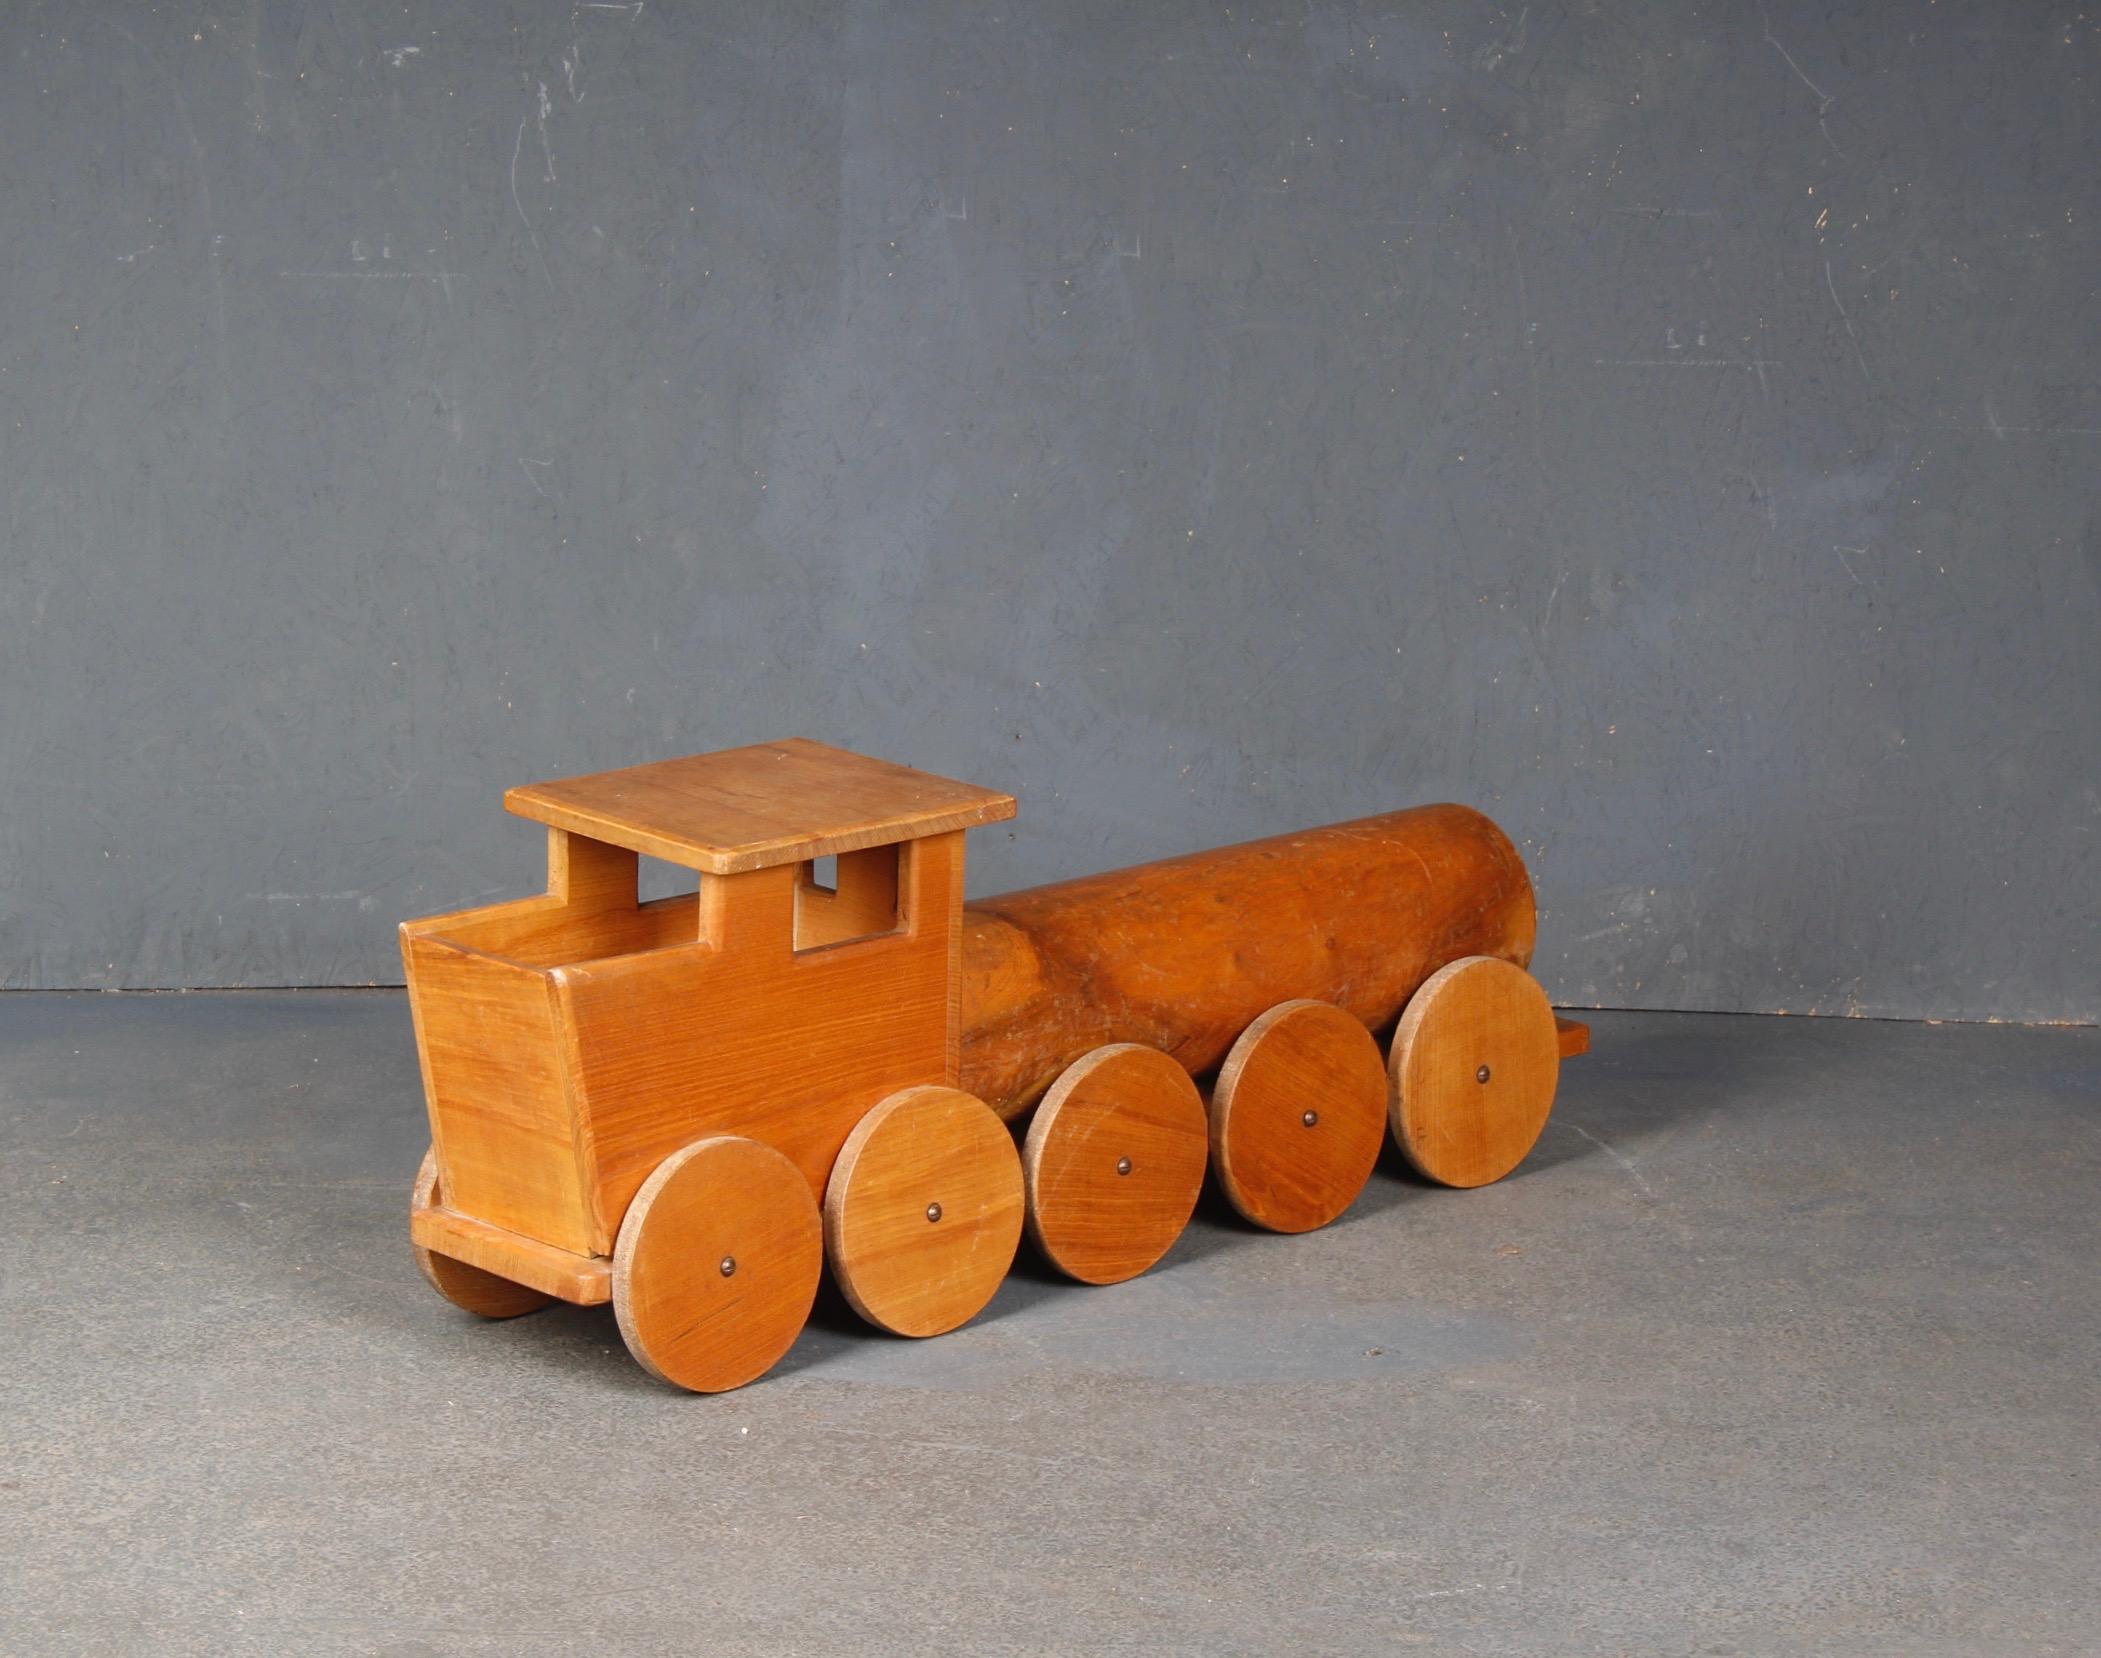 Wood Big locomotive toy with solid wood For Sale